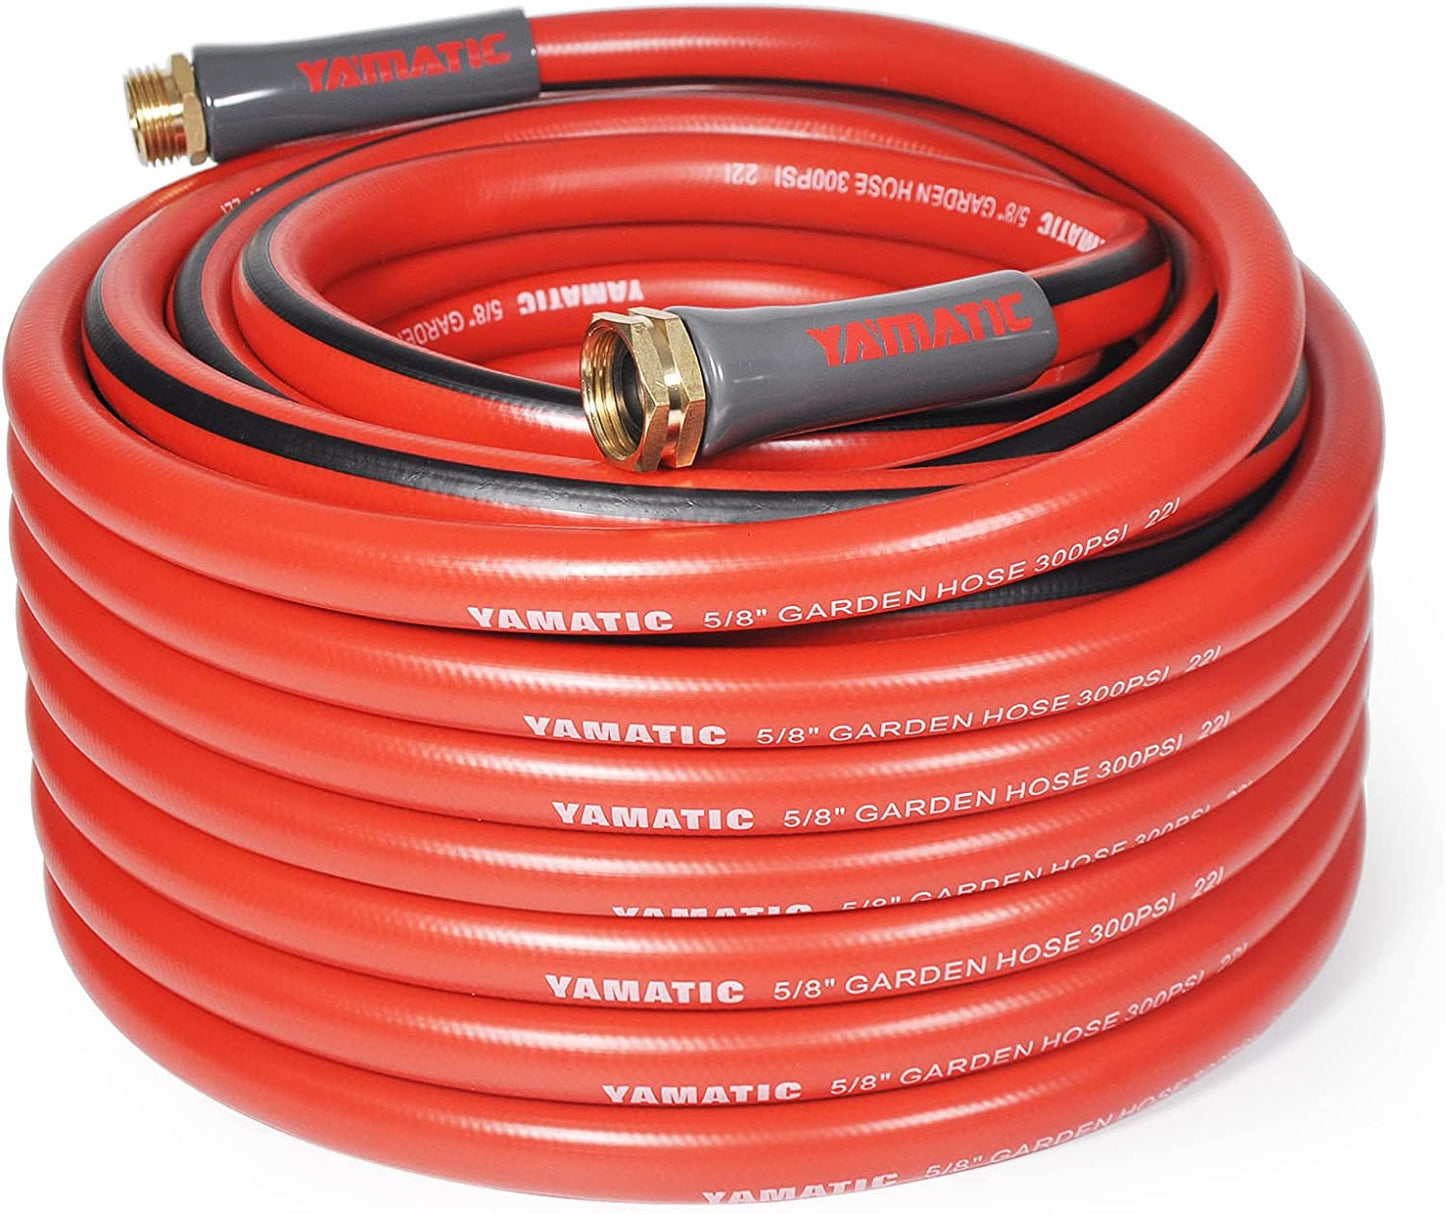 YAMATIC W Garden Hose 50 ft,Ultra Durable Water Hose, 5/8 inch Premium Hose with Solid Brass Connector for All-Weather Outdoor, Car wash, Lawn, Red..